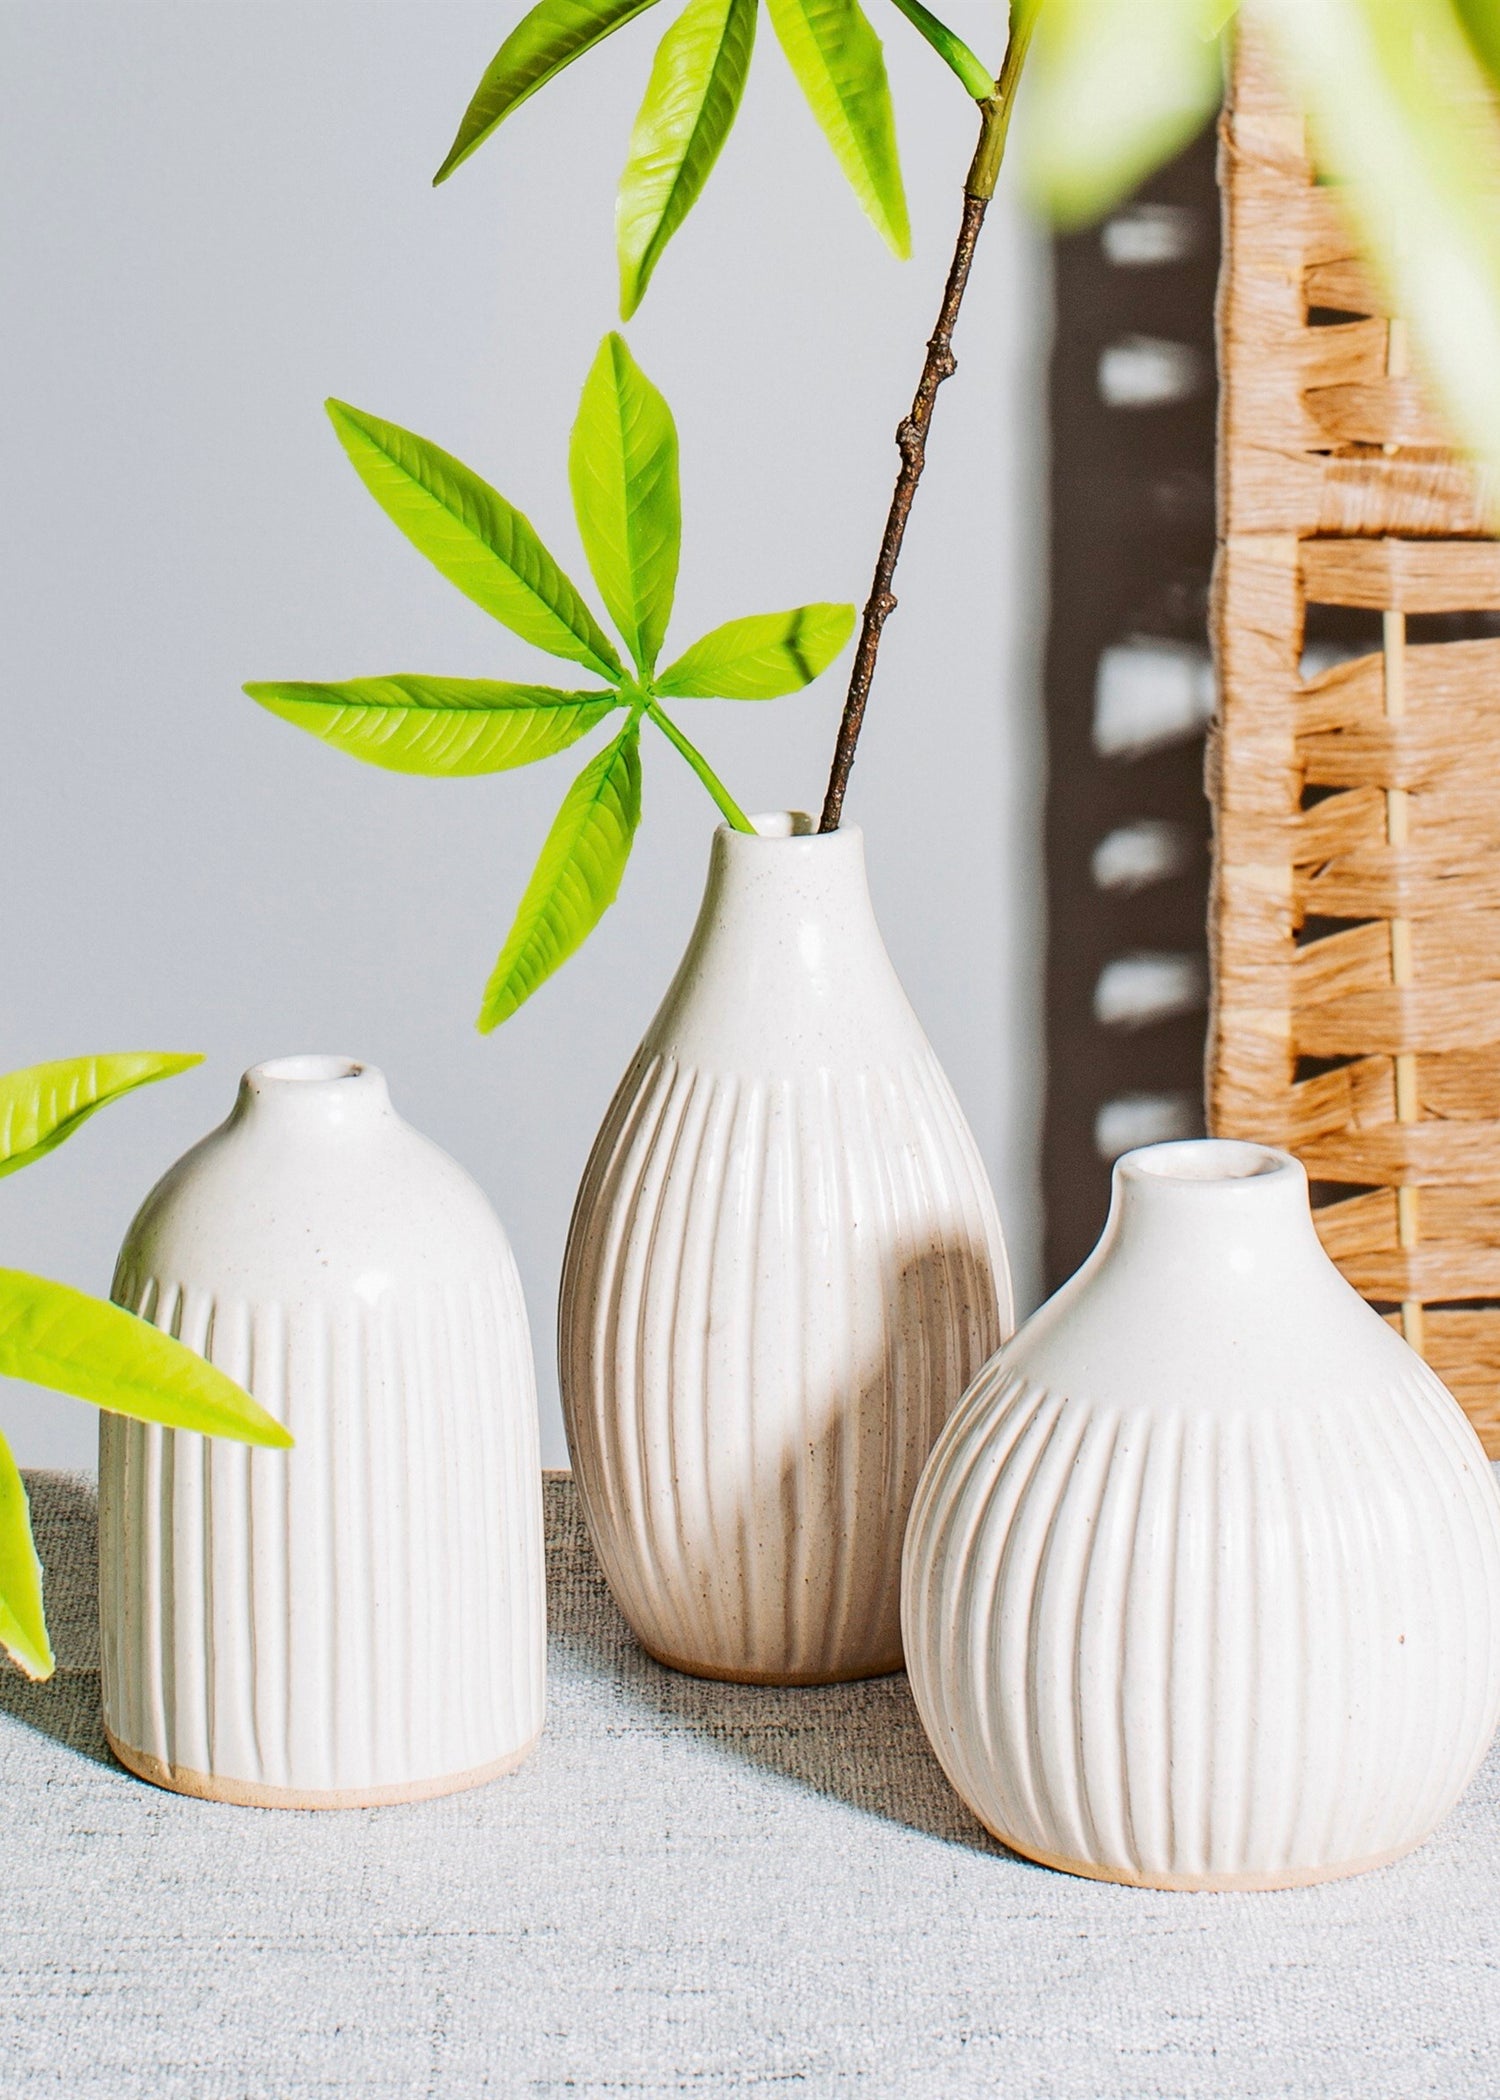 White vases with vertical grooves 